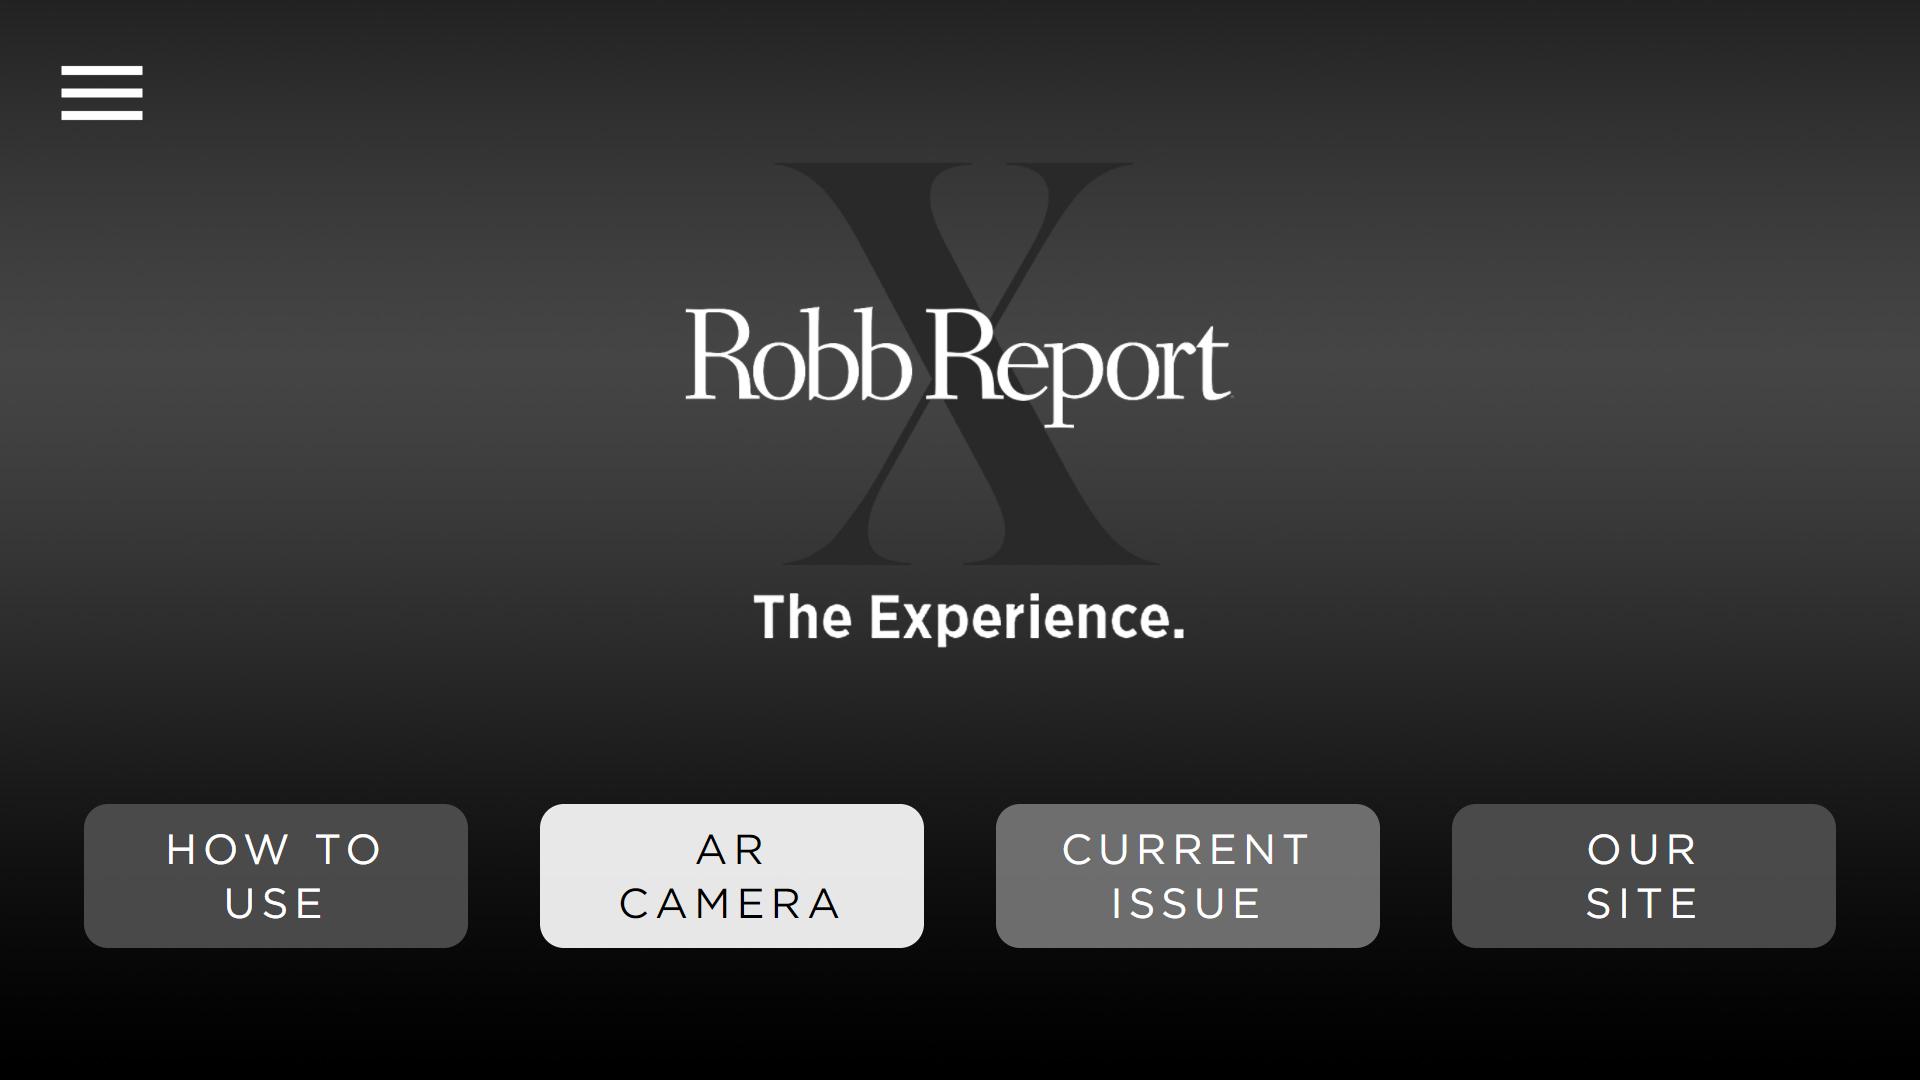 Robb Report - The Experience